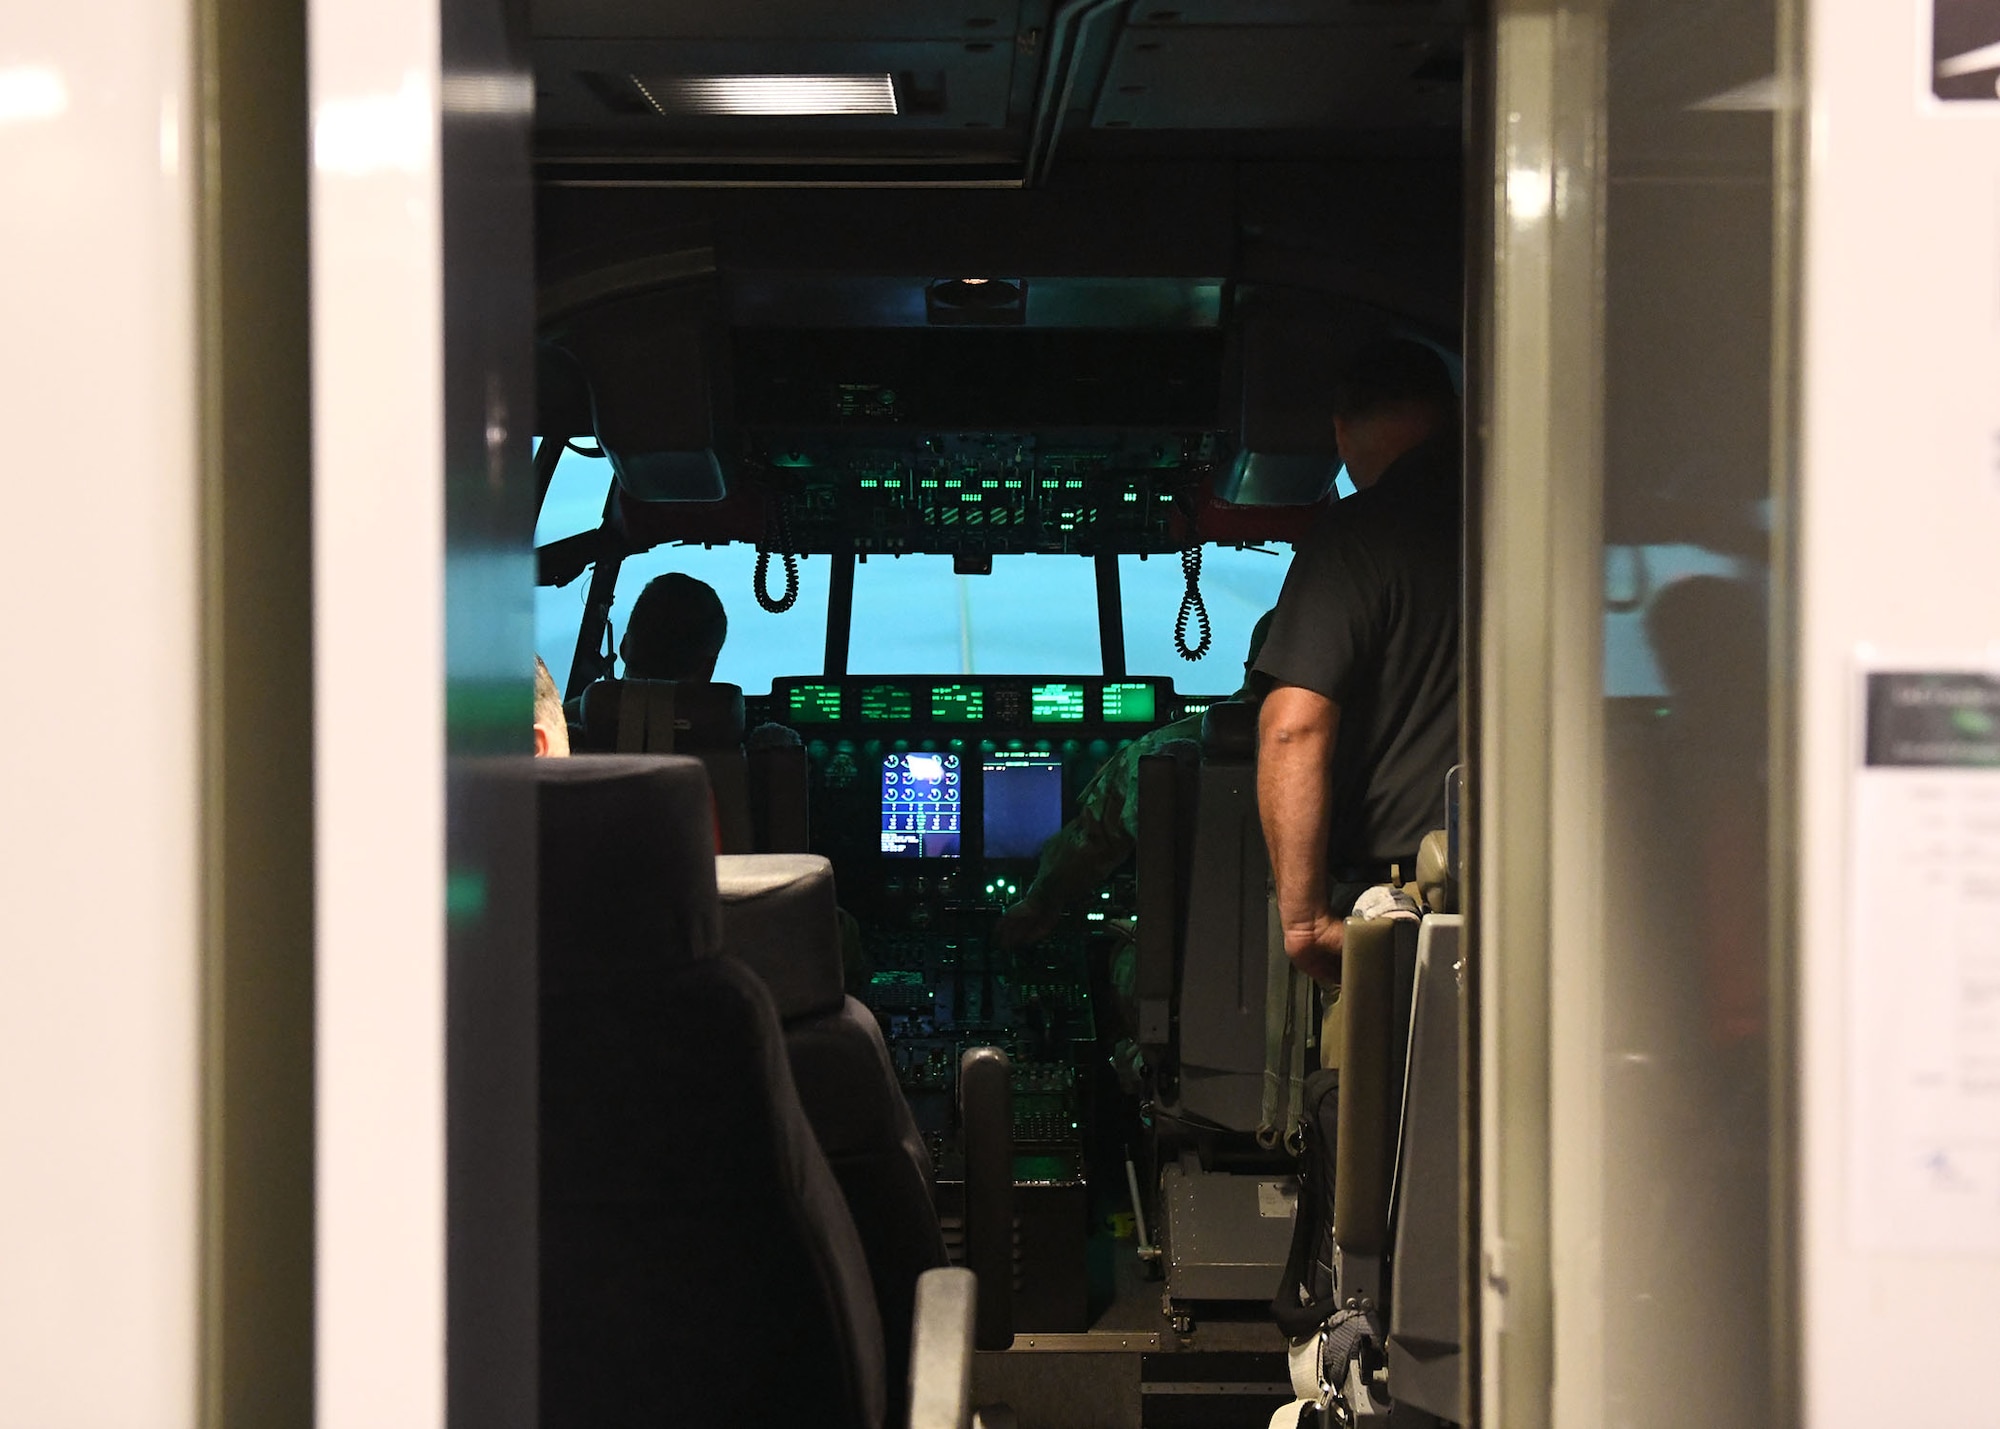 Two men sit in front of the controls of a simulator that is made to look like the inside of a plane.